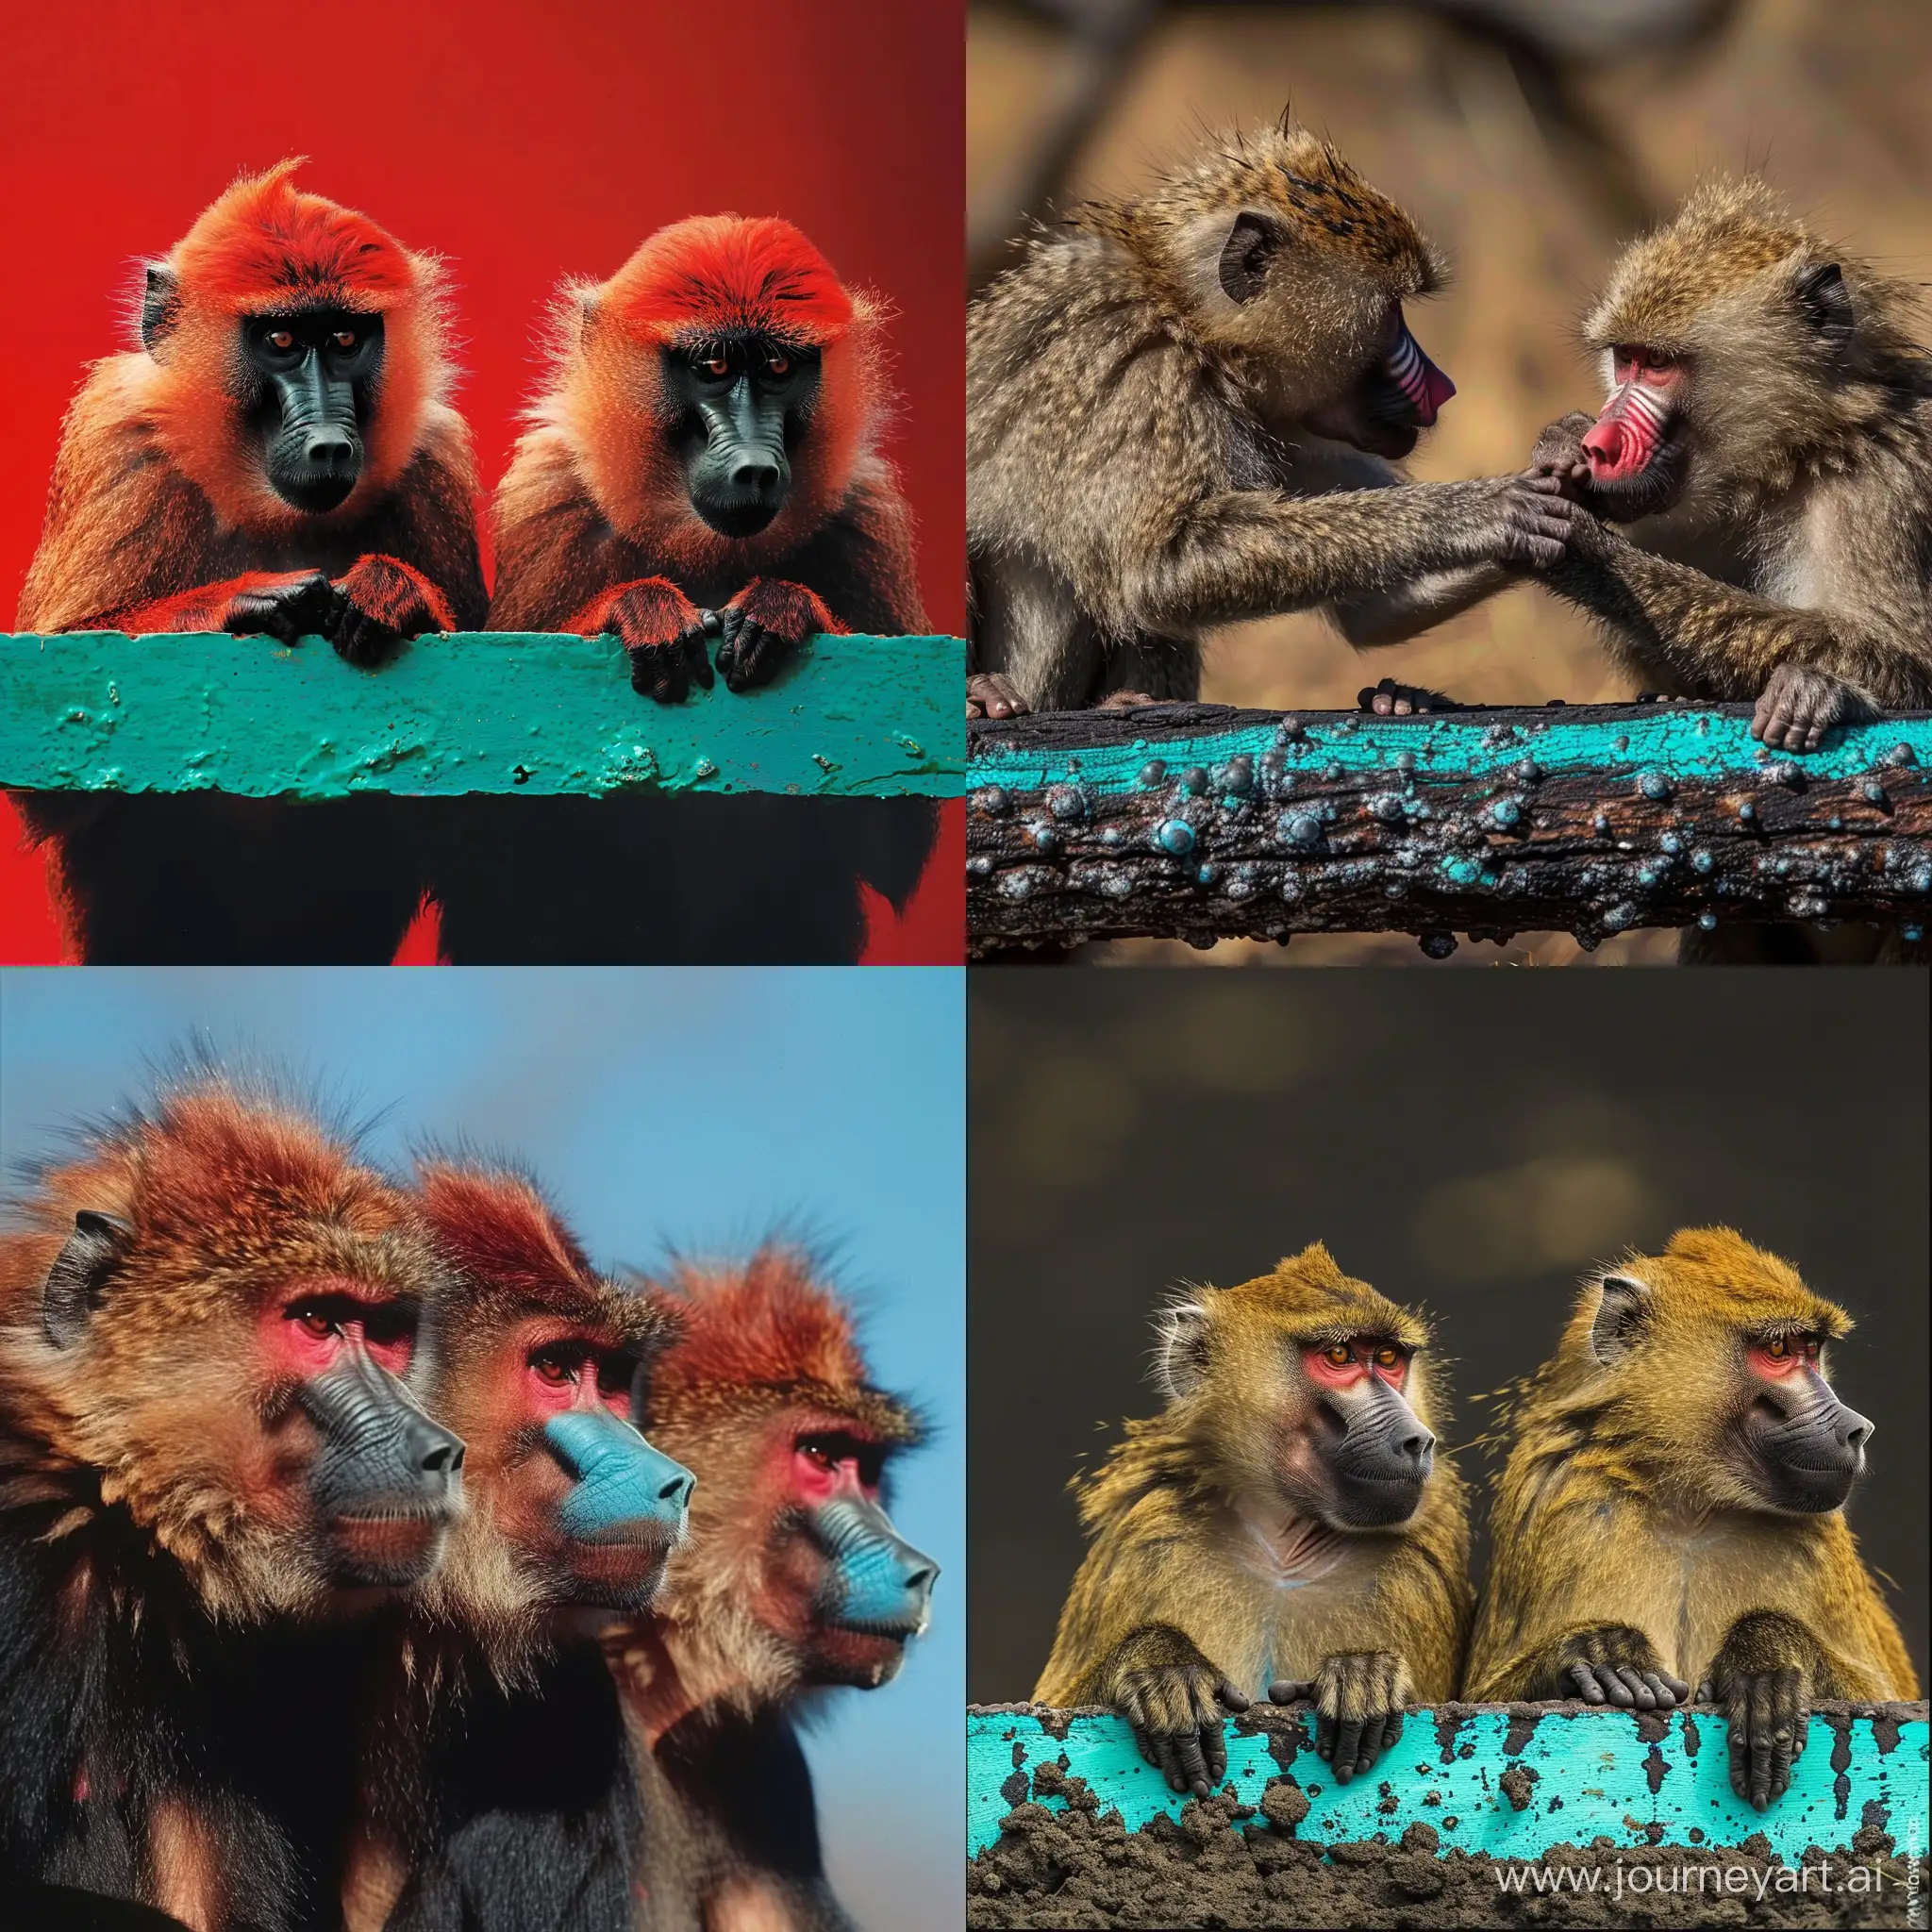 Red-Baboons-in-Natural-Habitat-Striking-TurquoiseBlack-Striped-Group